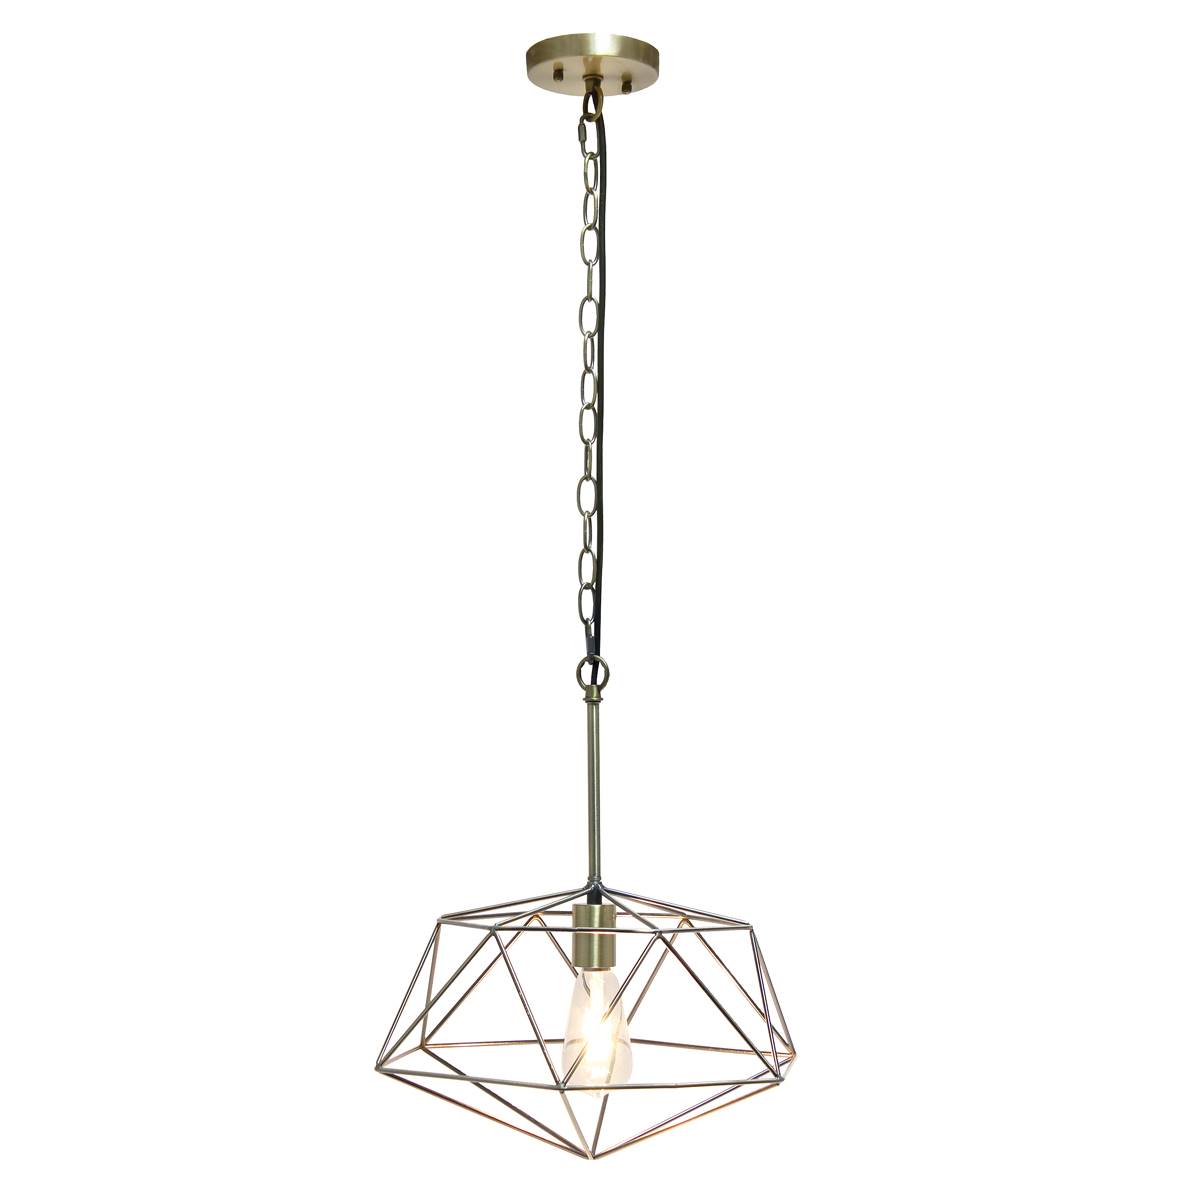 Lalia Home 1 Light 16in Modern Metal Wire Paragon Ceiling Pendant